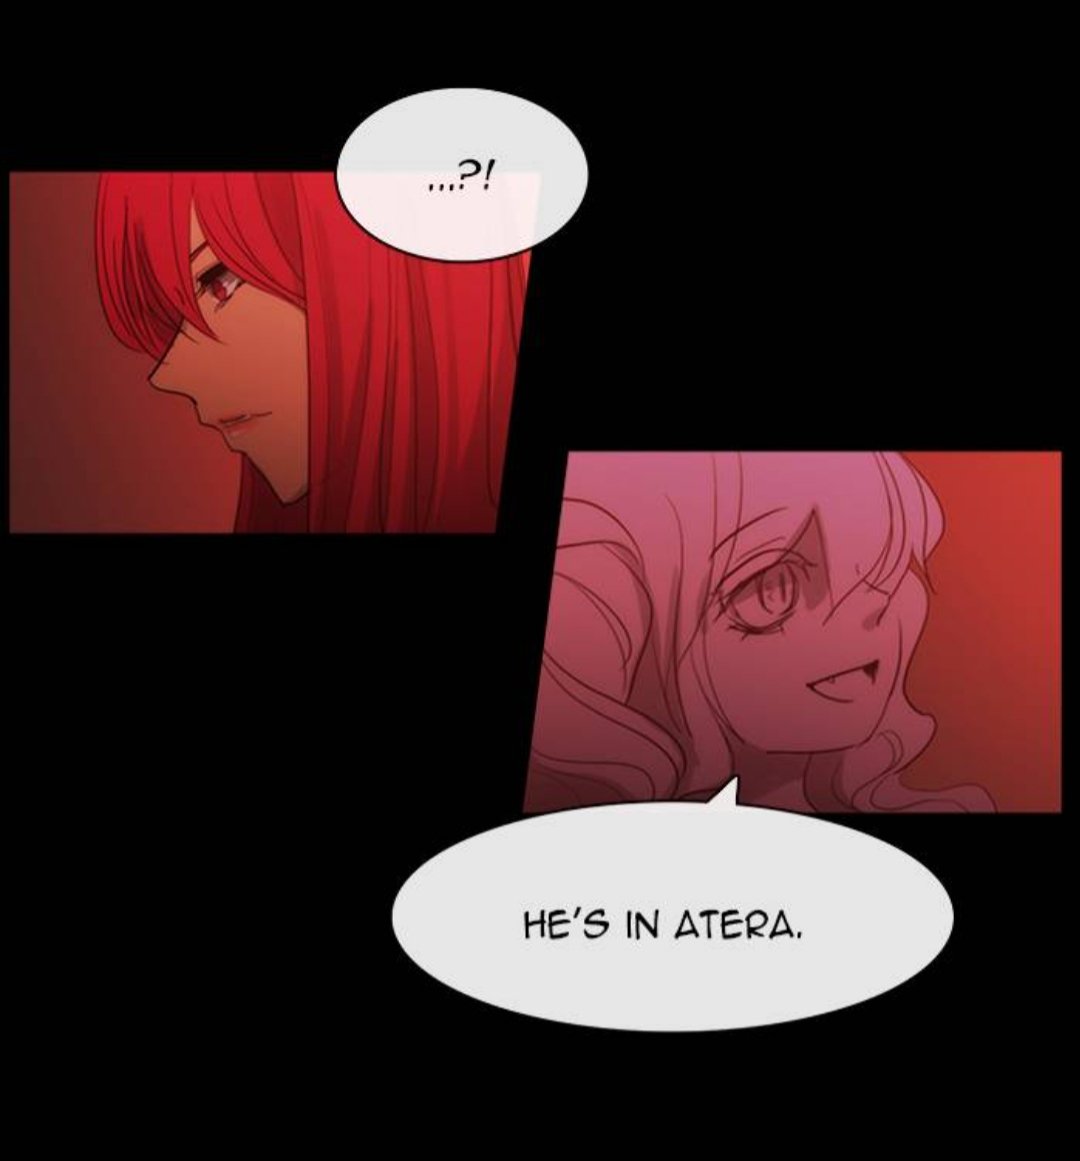 So, Brilith genuinely thought that Agni was in Kalibloom, huh #kubera